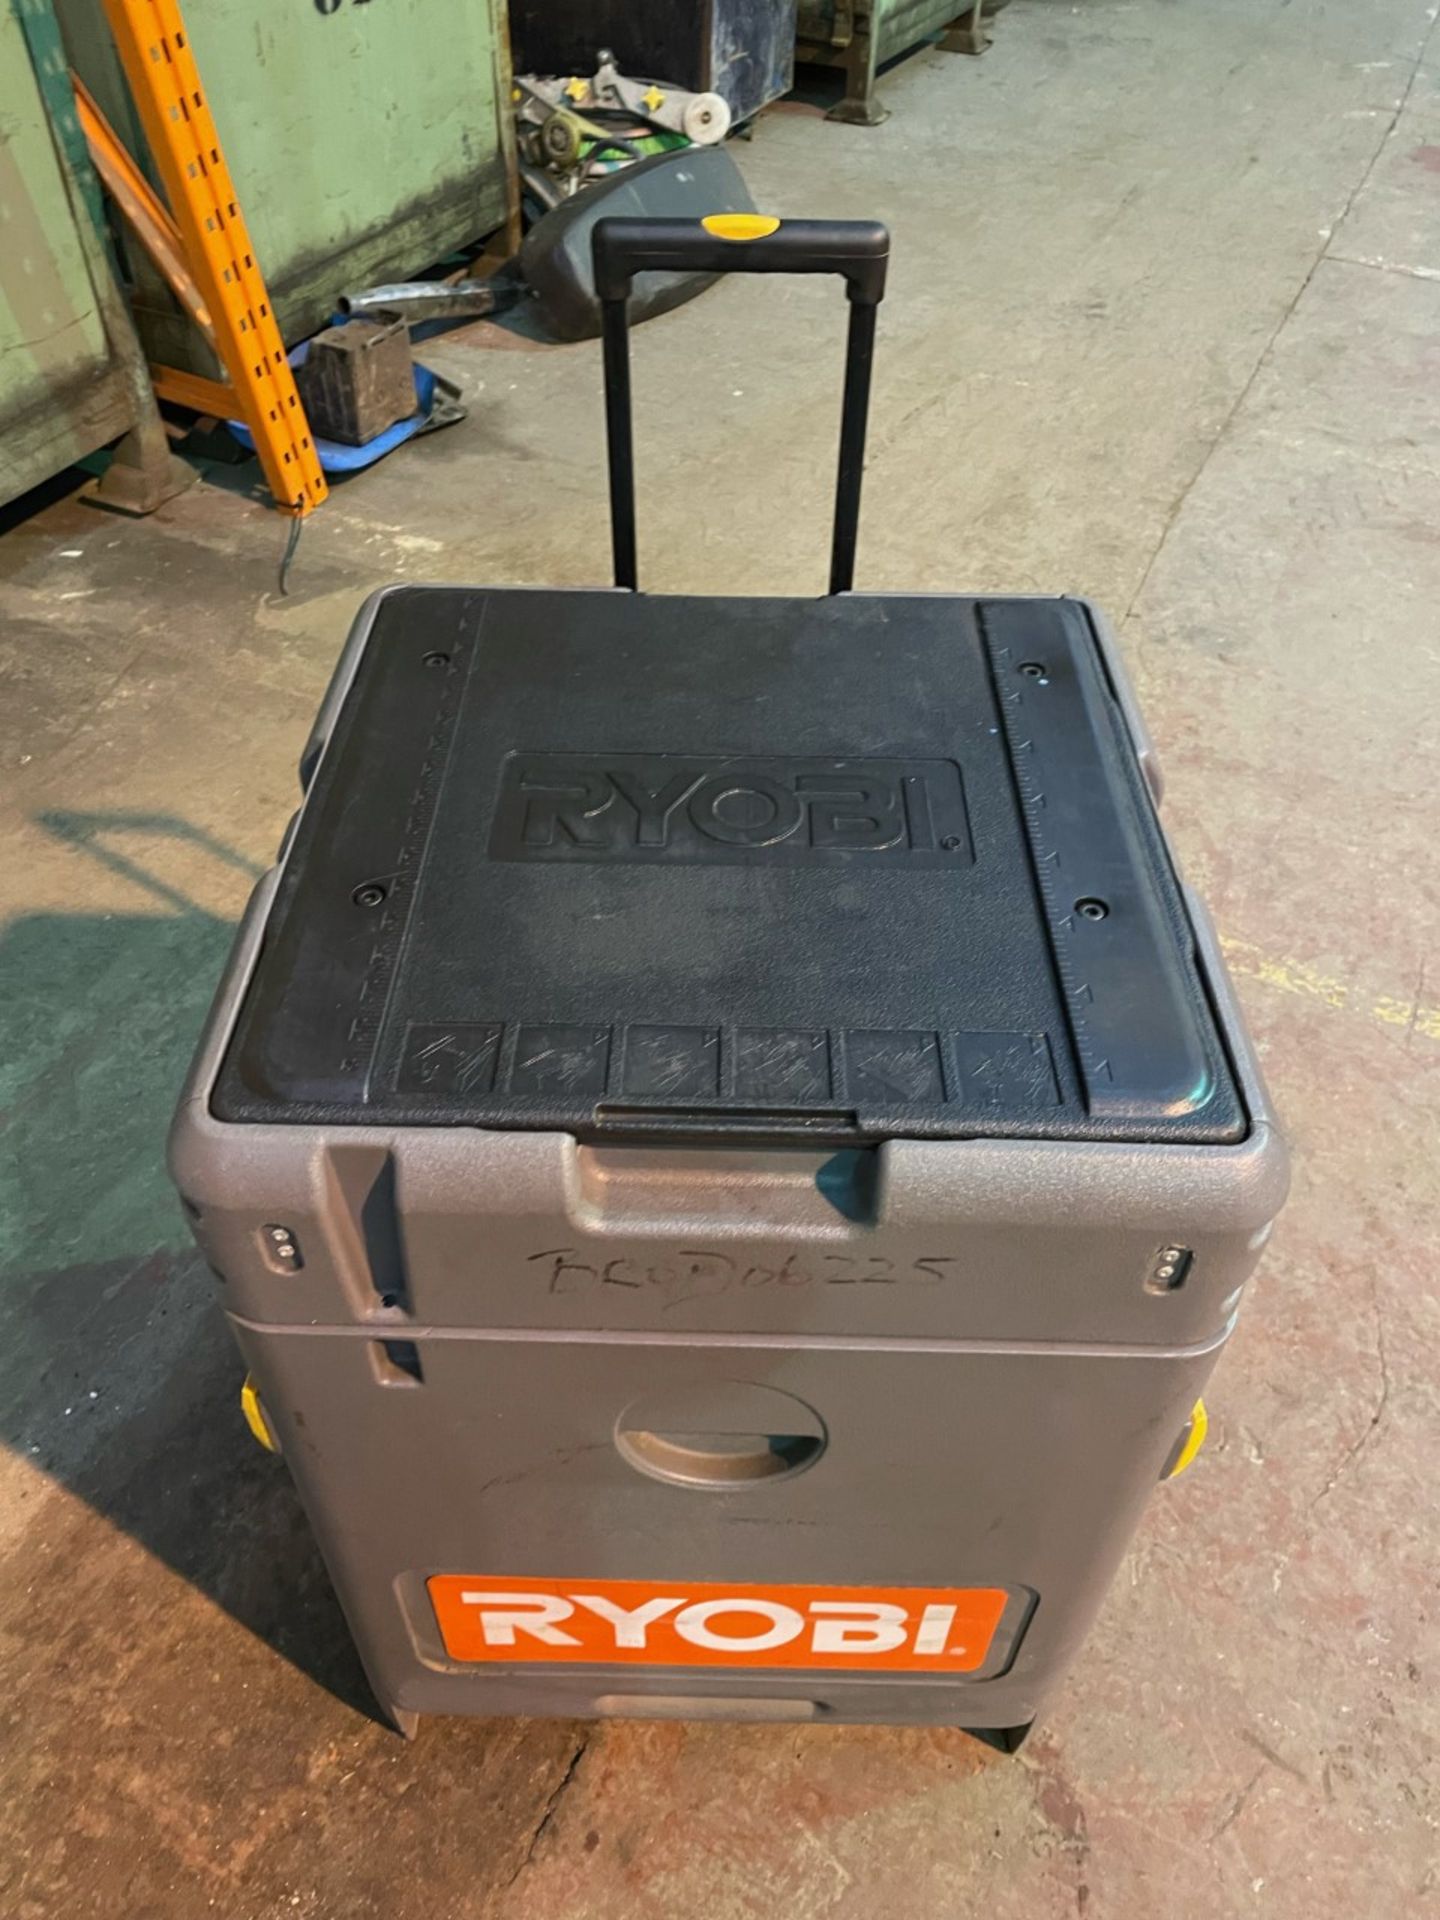 Ryobi mobile work station with 18v mitre saw. Saw blade never been used. Battery not included - Image 3 of 3